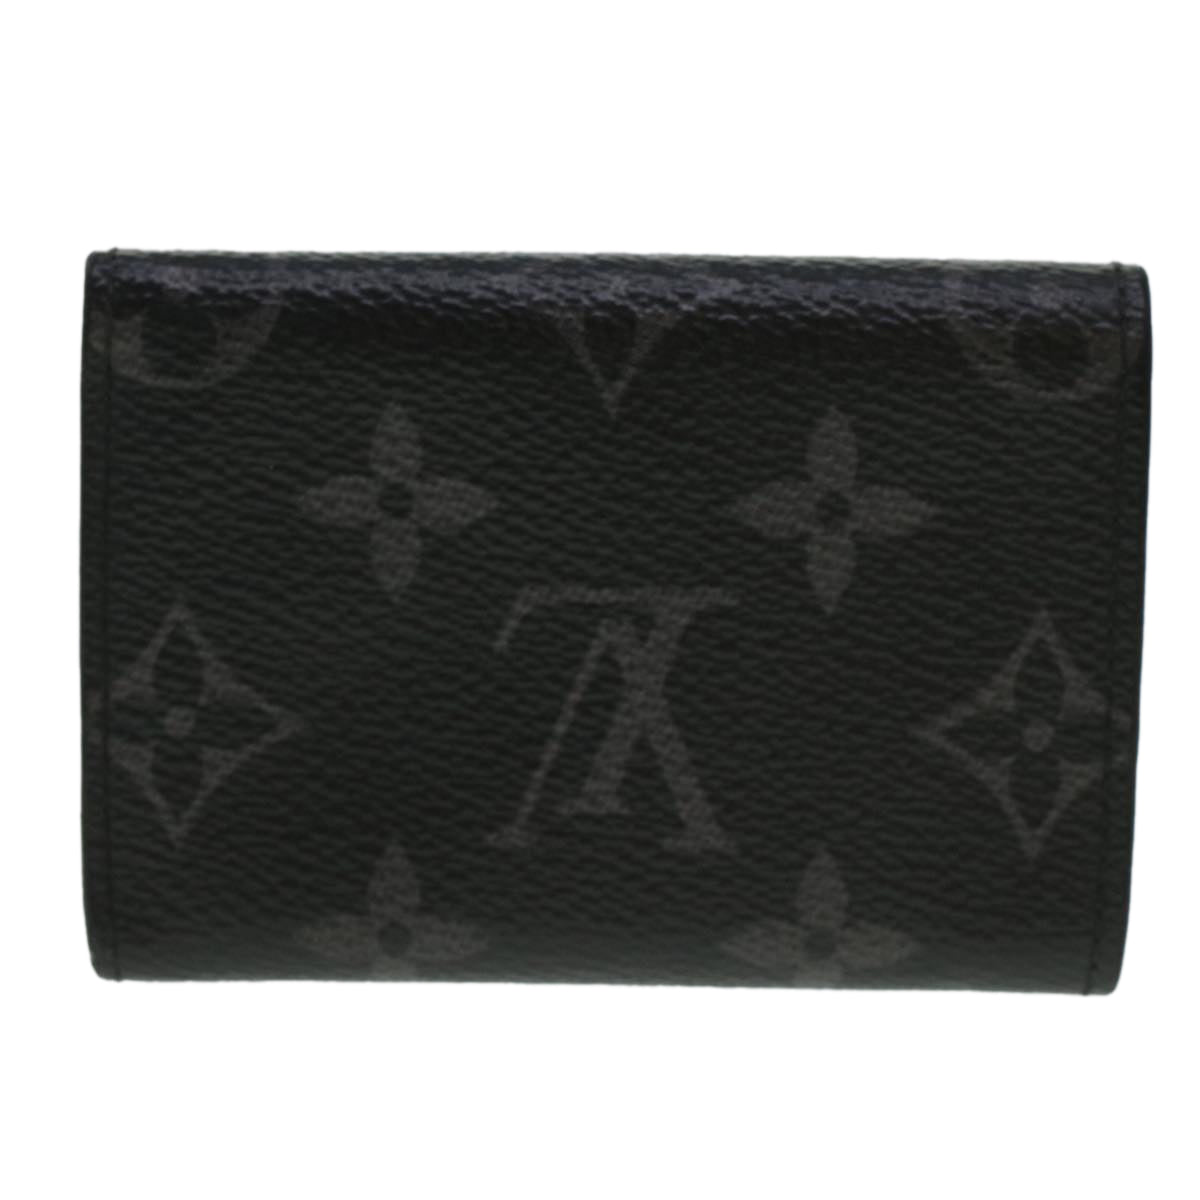 LOUISVUITTON Monogram Eclipse Reverse Discovery Compact Wallet M45417 Auth 42524 - 0